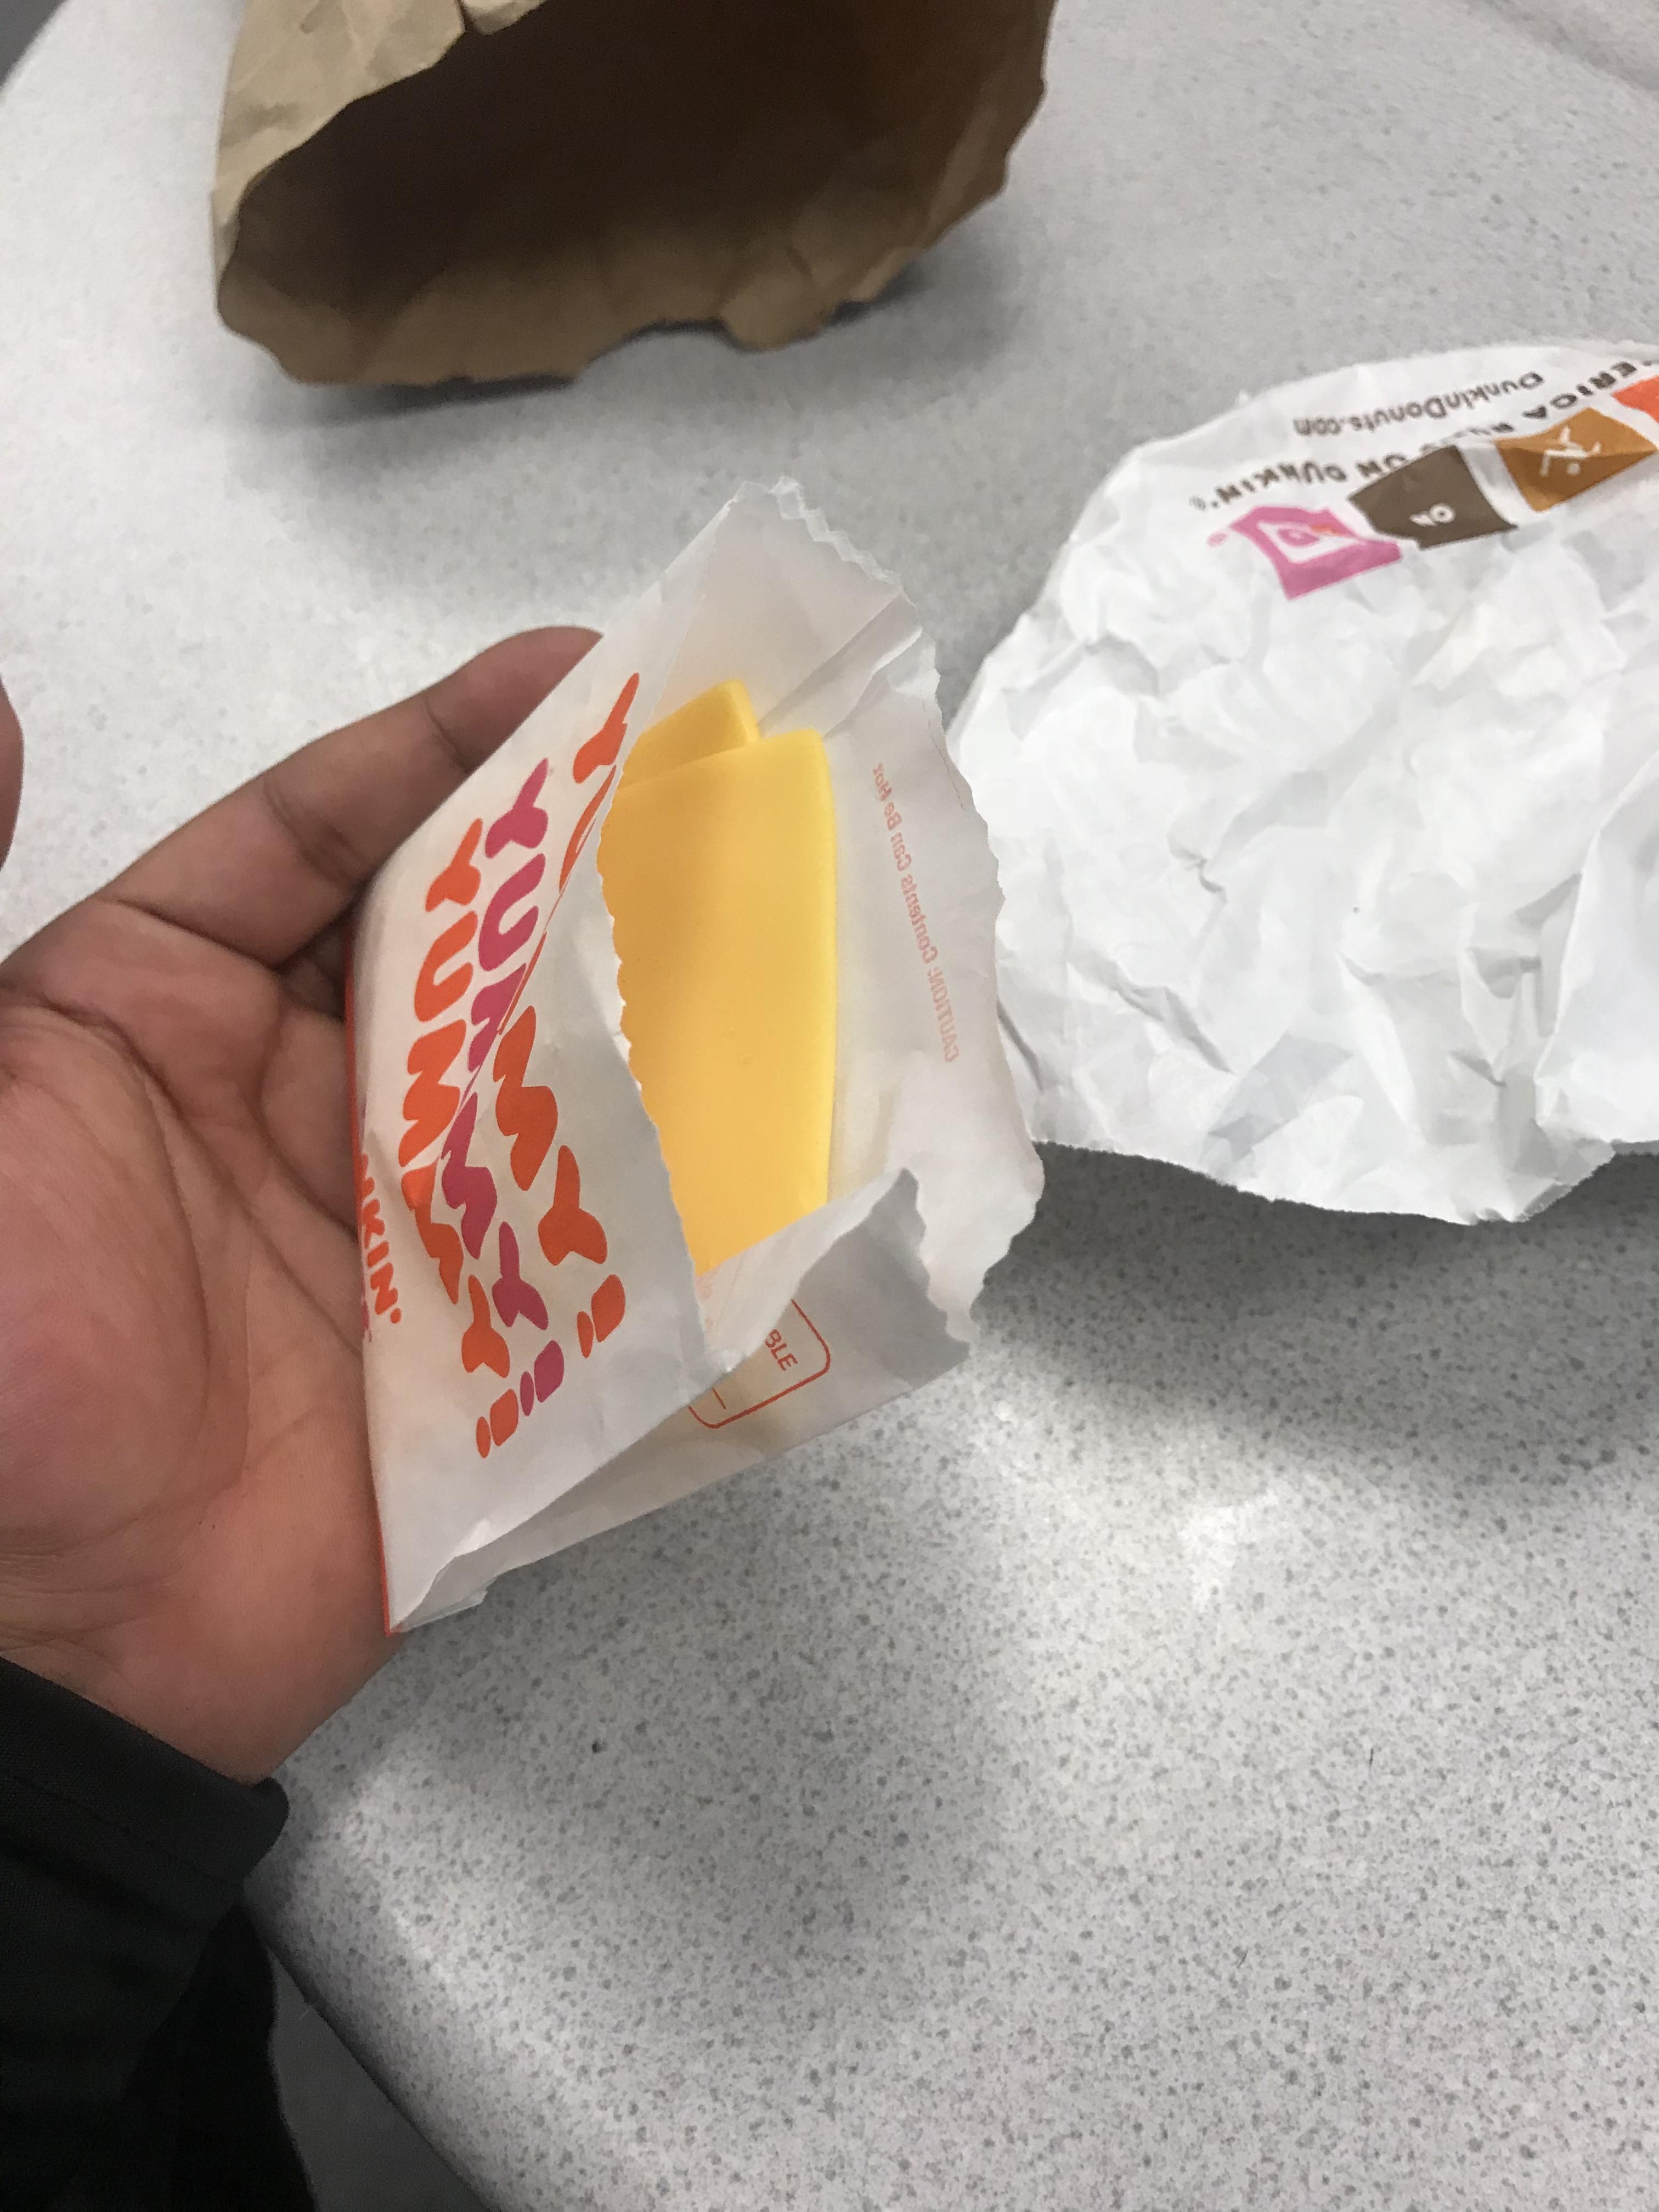 When I asked for extra cheese, this isn't what I meant Dunkin.